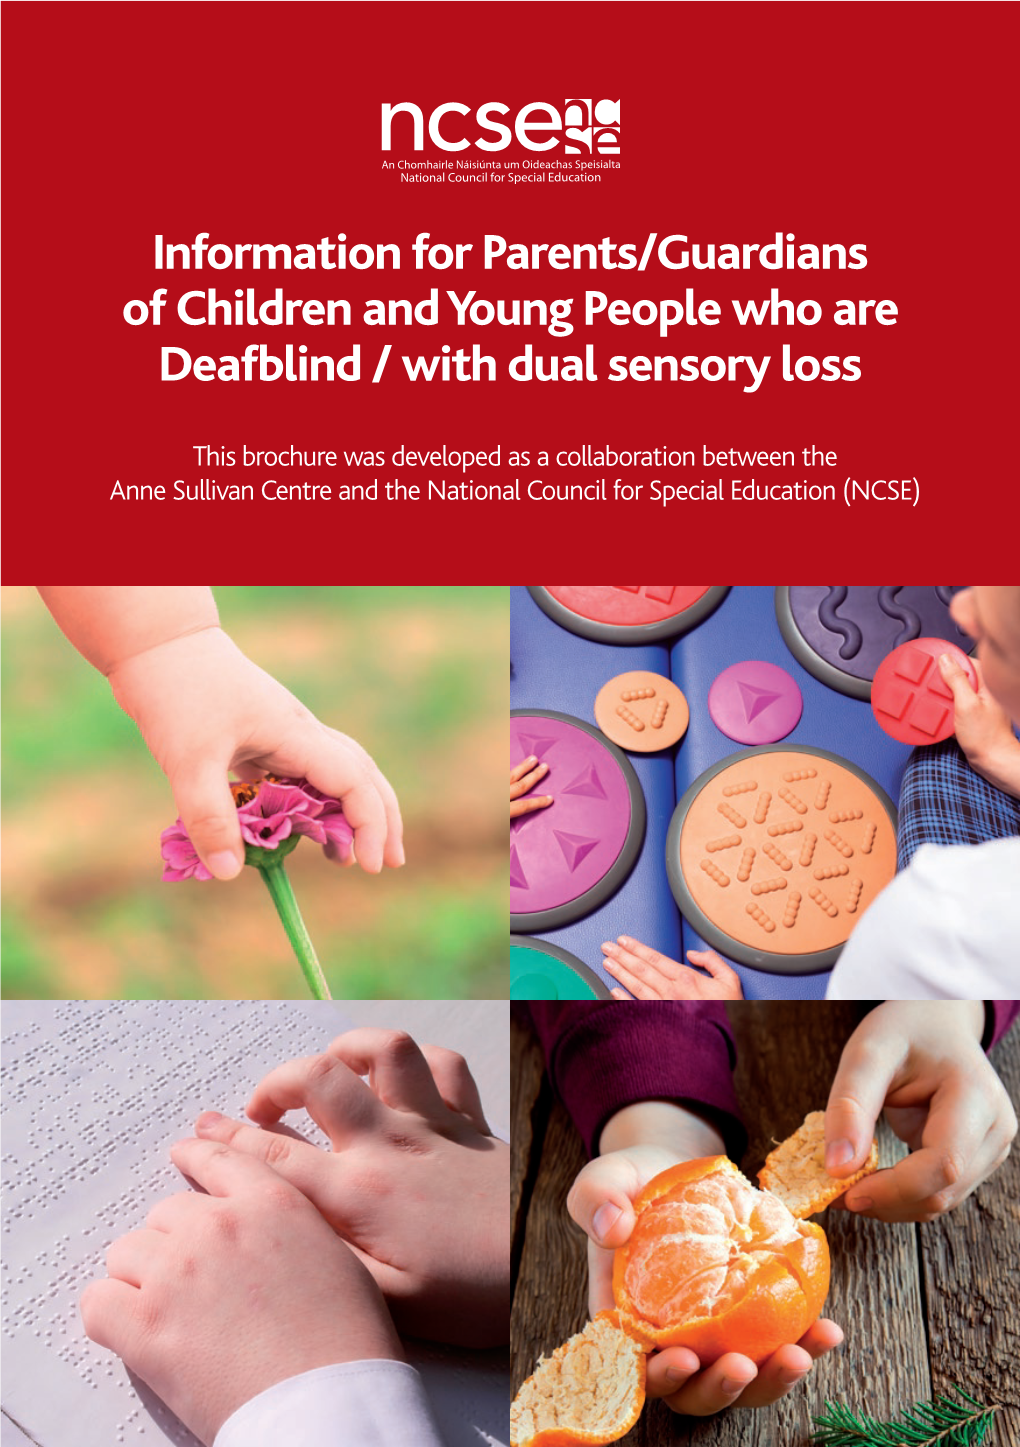 Information for Parents/Guardians of Children and Young People Who Are Deafblind / with Dual Sensory Loss